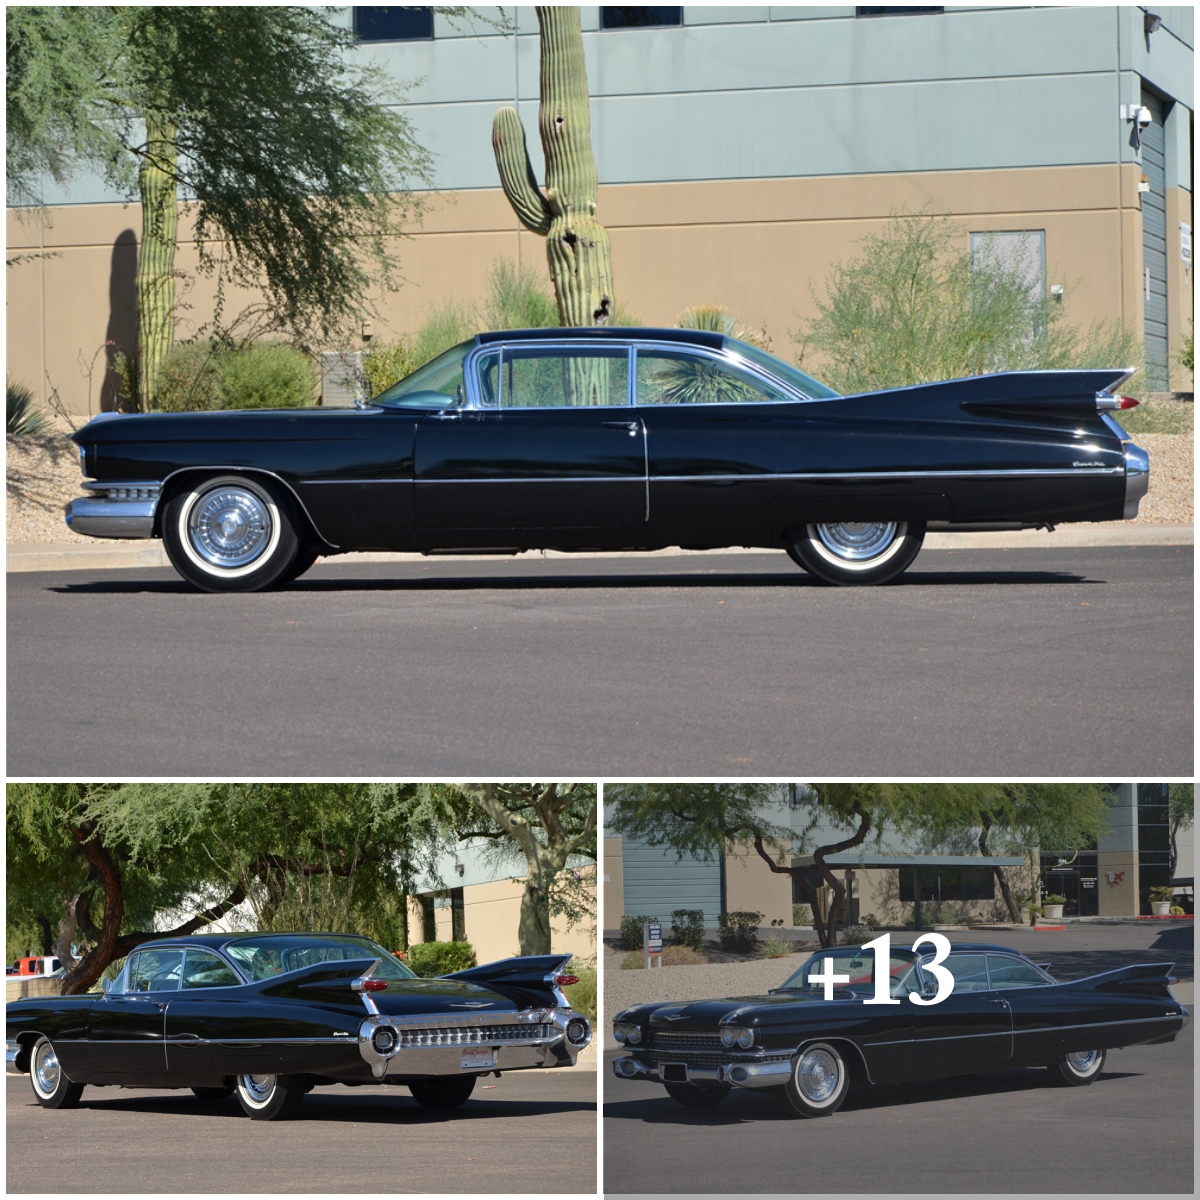 The Classic Elegance of the 1959 Cadillac Coupe DeVille